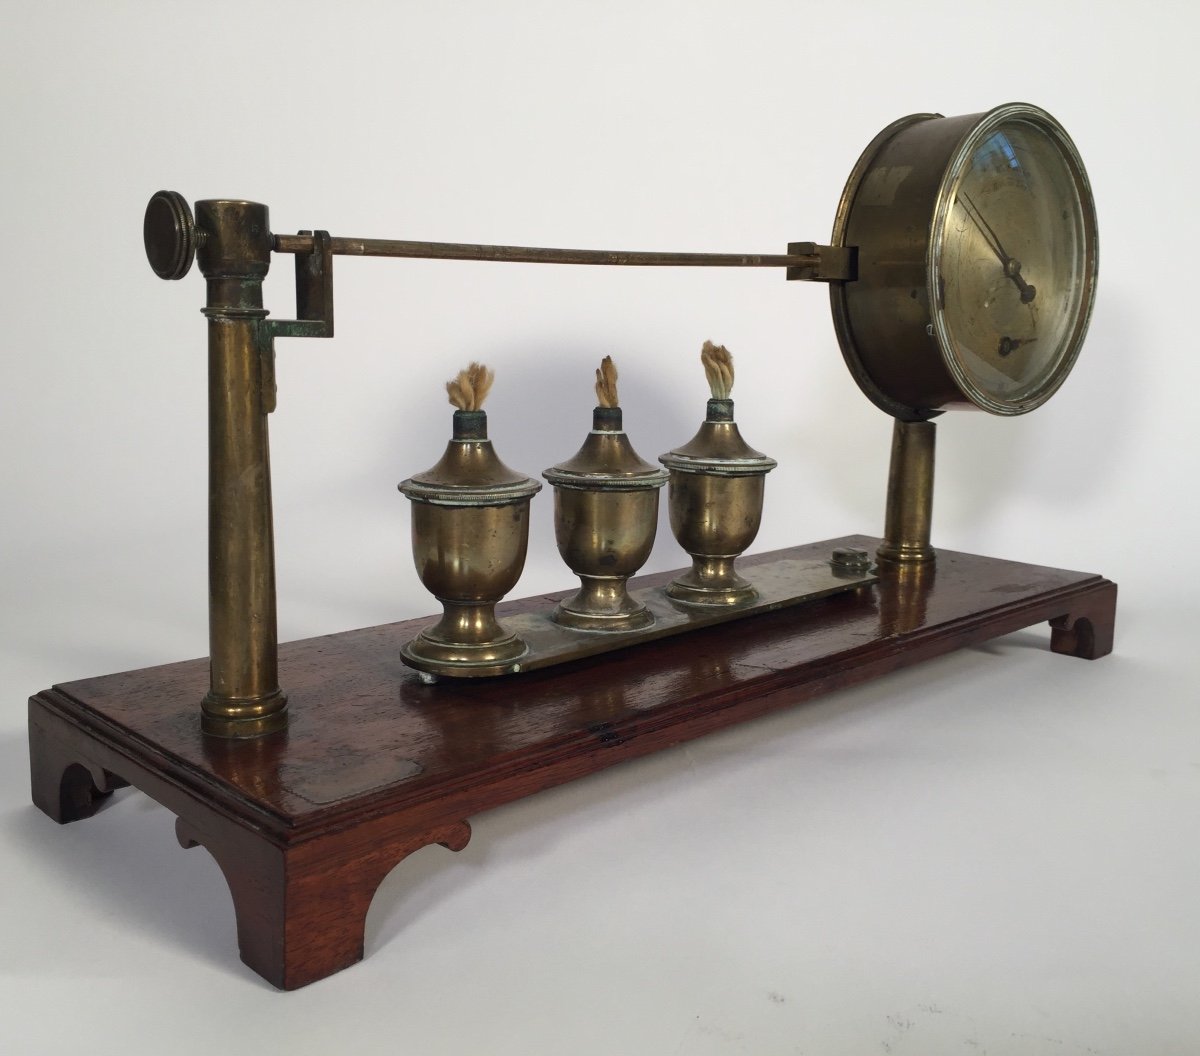 Instrument For Demonstration Of Metallic Expansion - England 19th Century